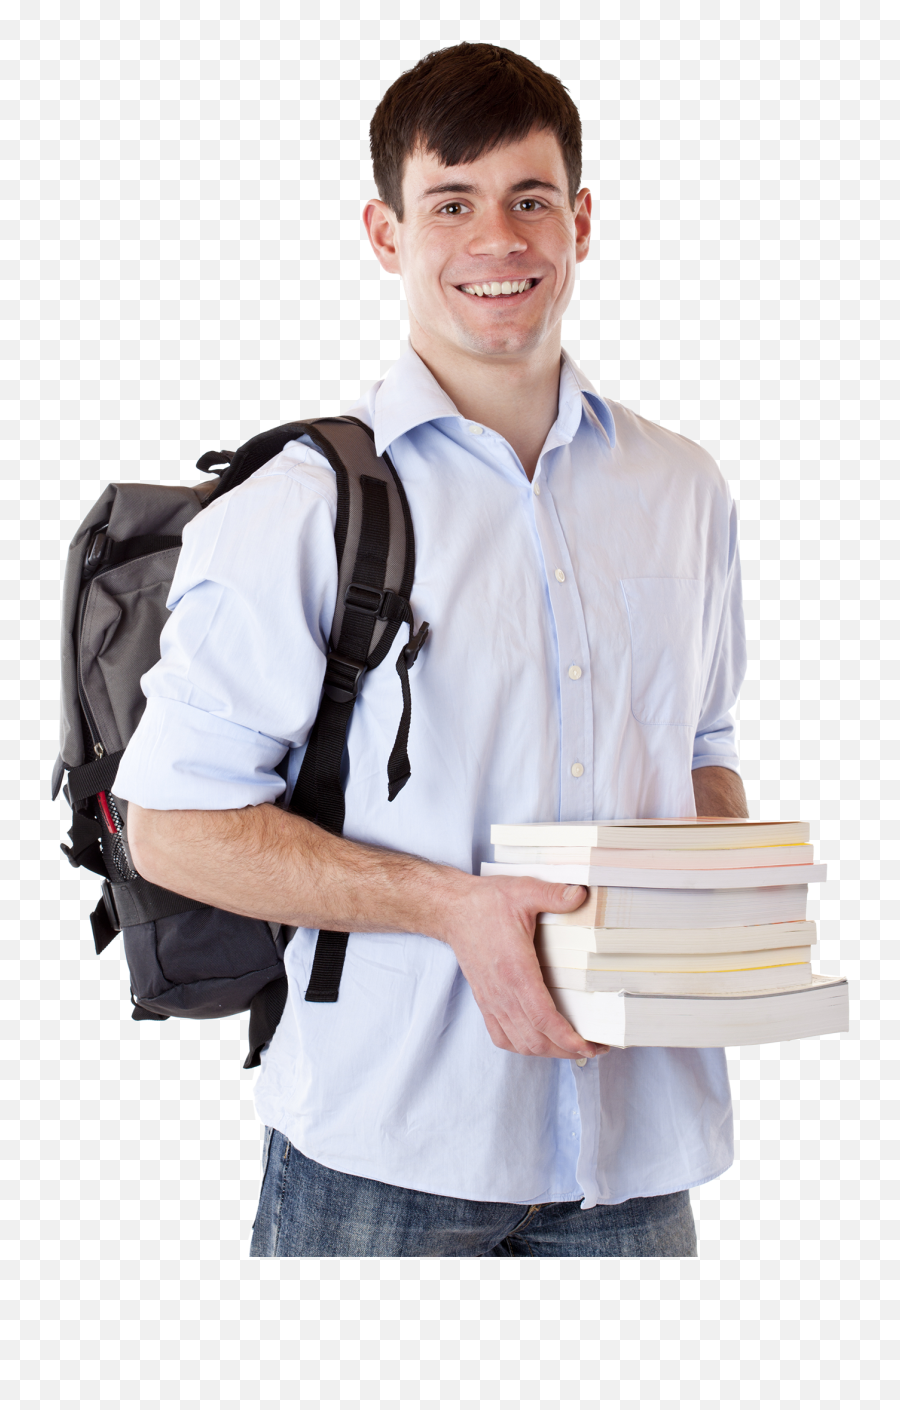 This Has Always An Full Download Evidence Based Technical - Student Png Free Download,College Student Png